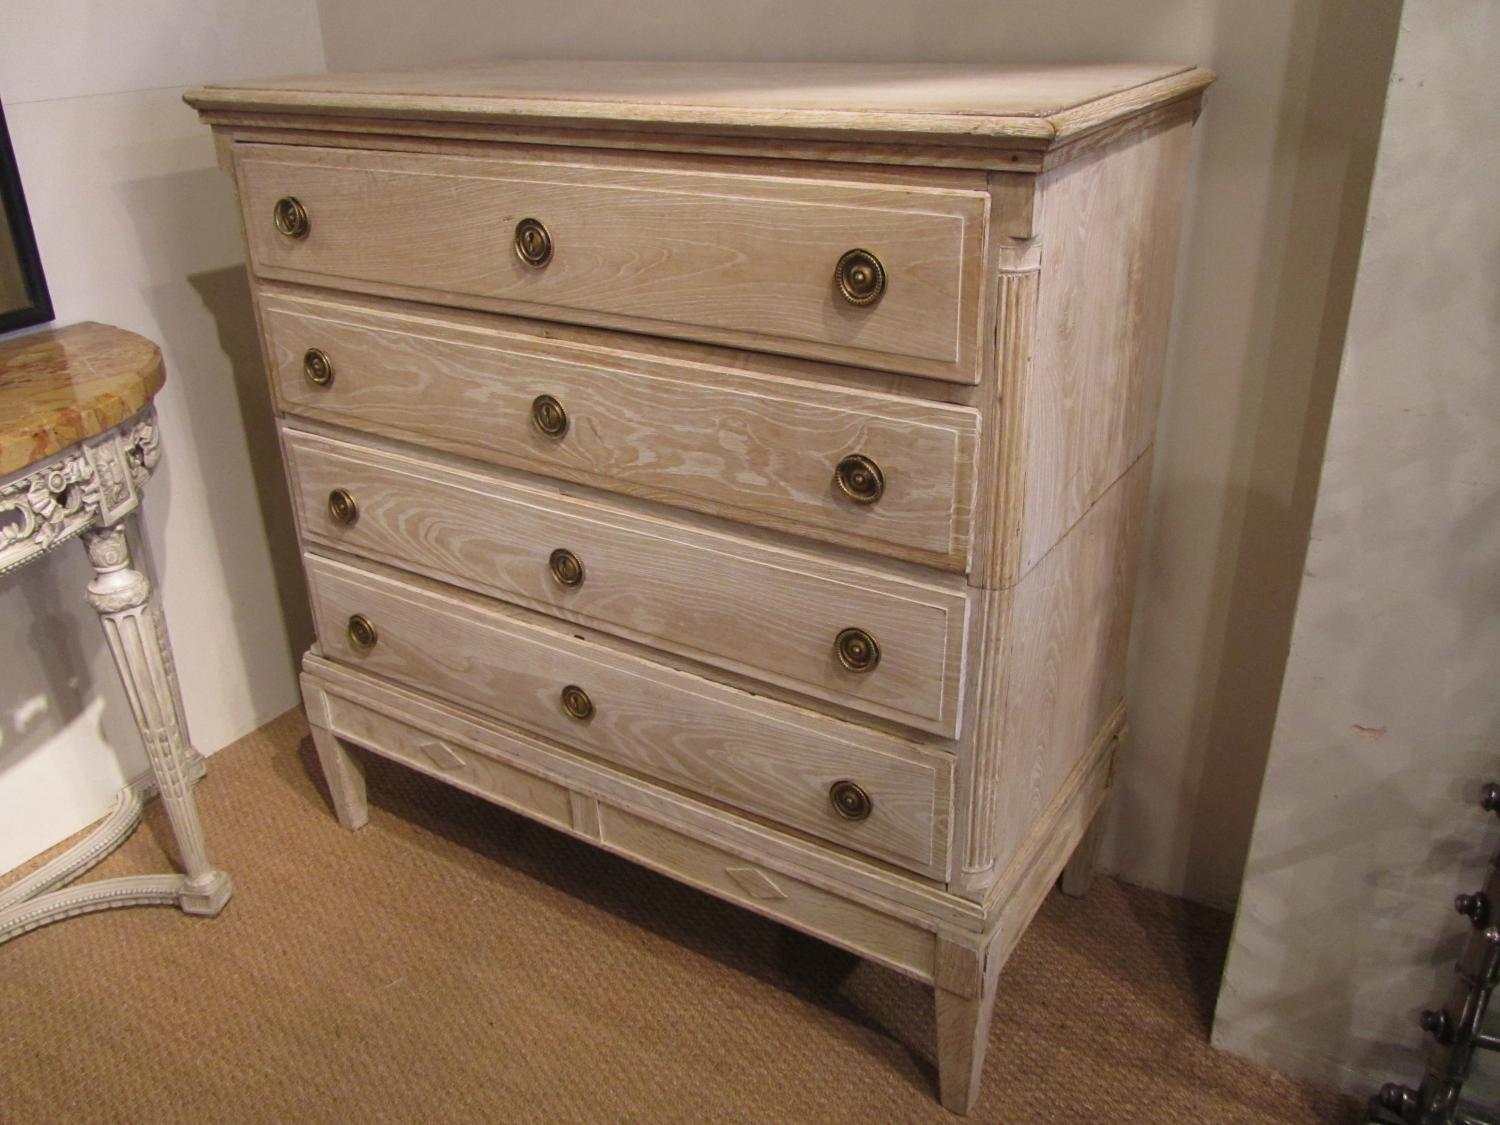 A large Swedish chest of drawers